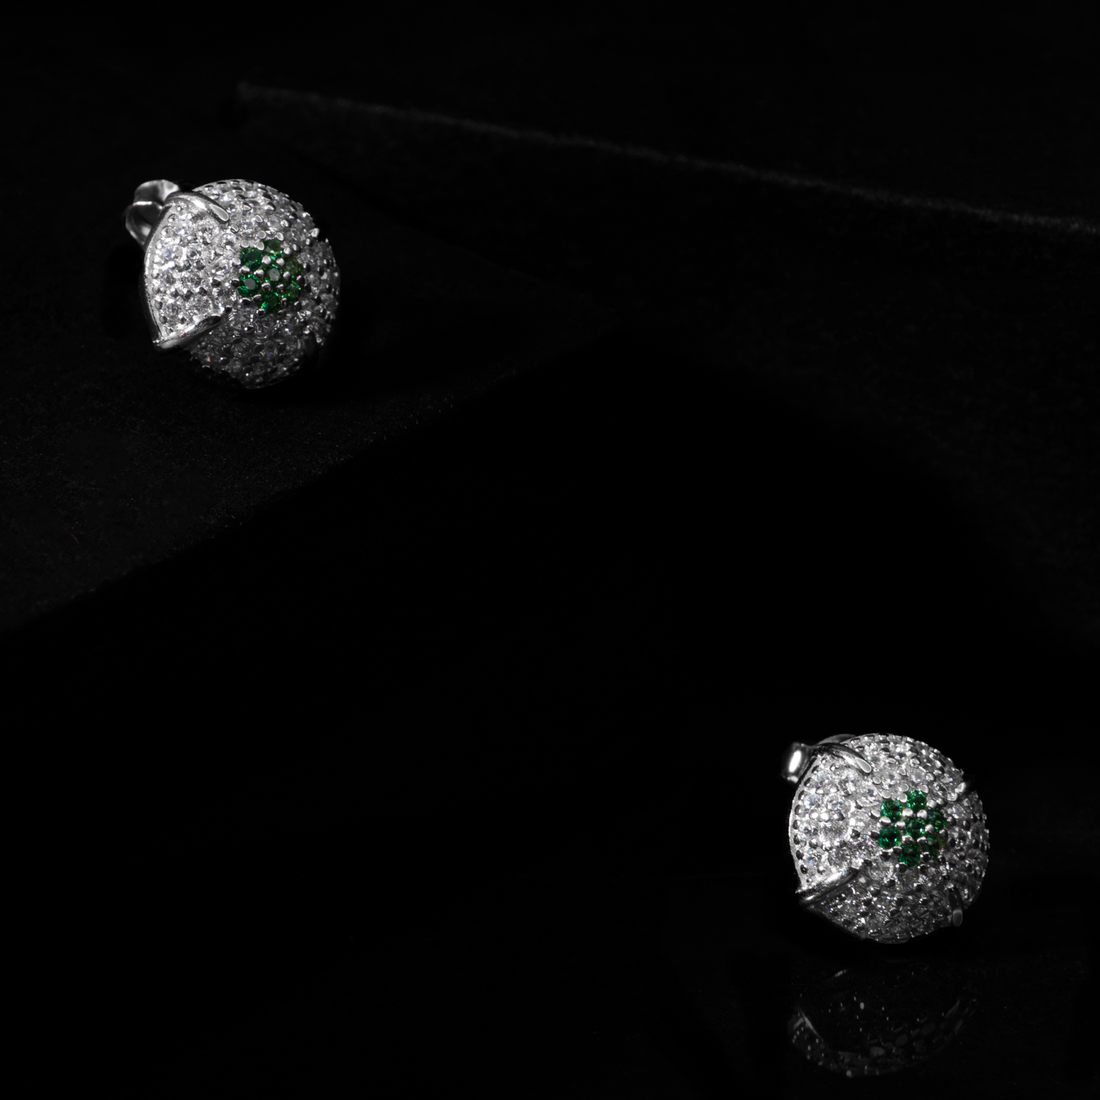 Trend Green CZ Studs for him